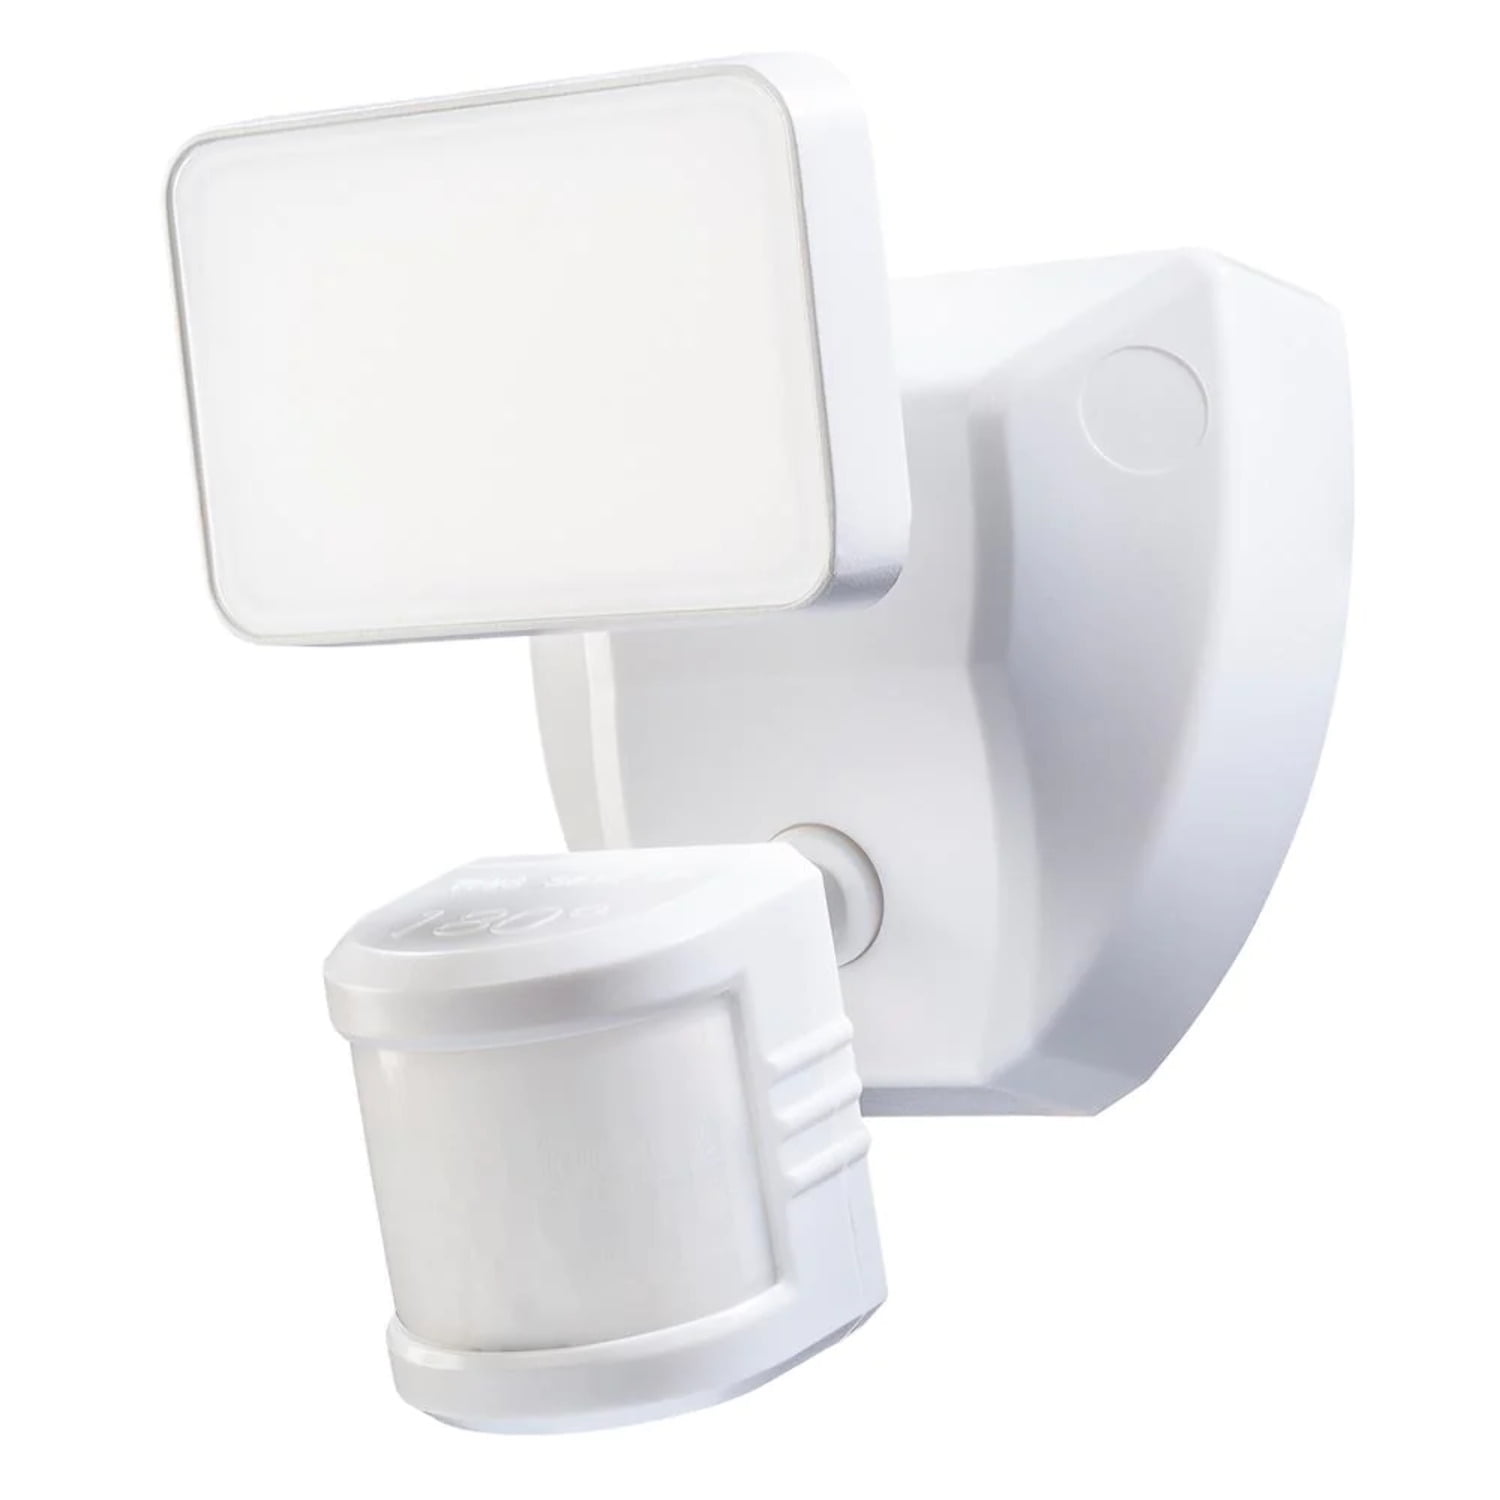 LED Sensor Wi-Fi Outdoor Light Motion Connected